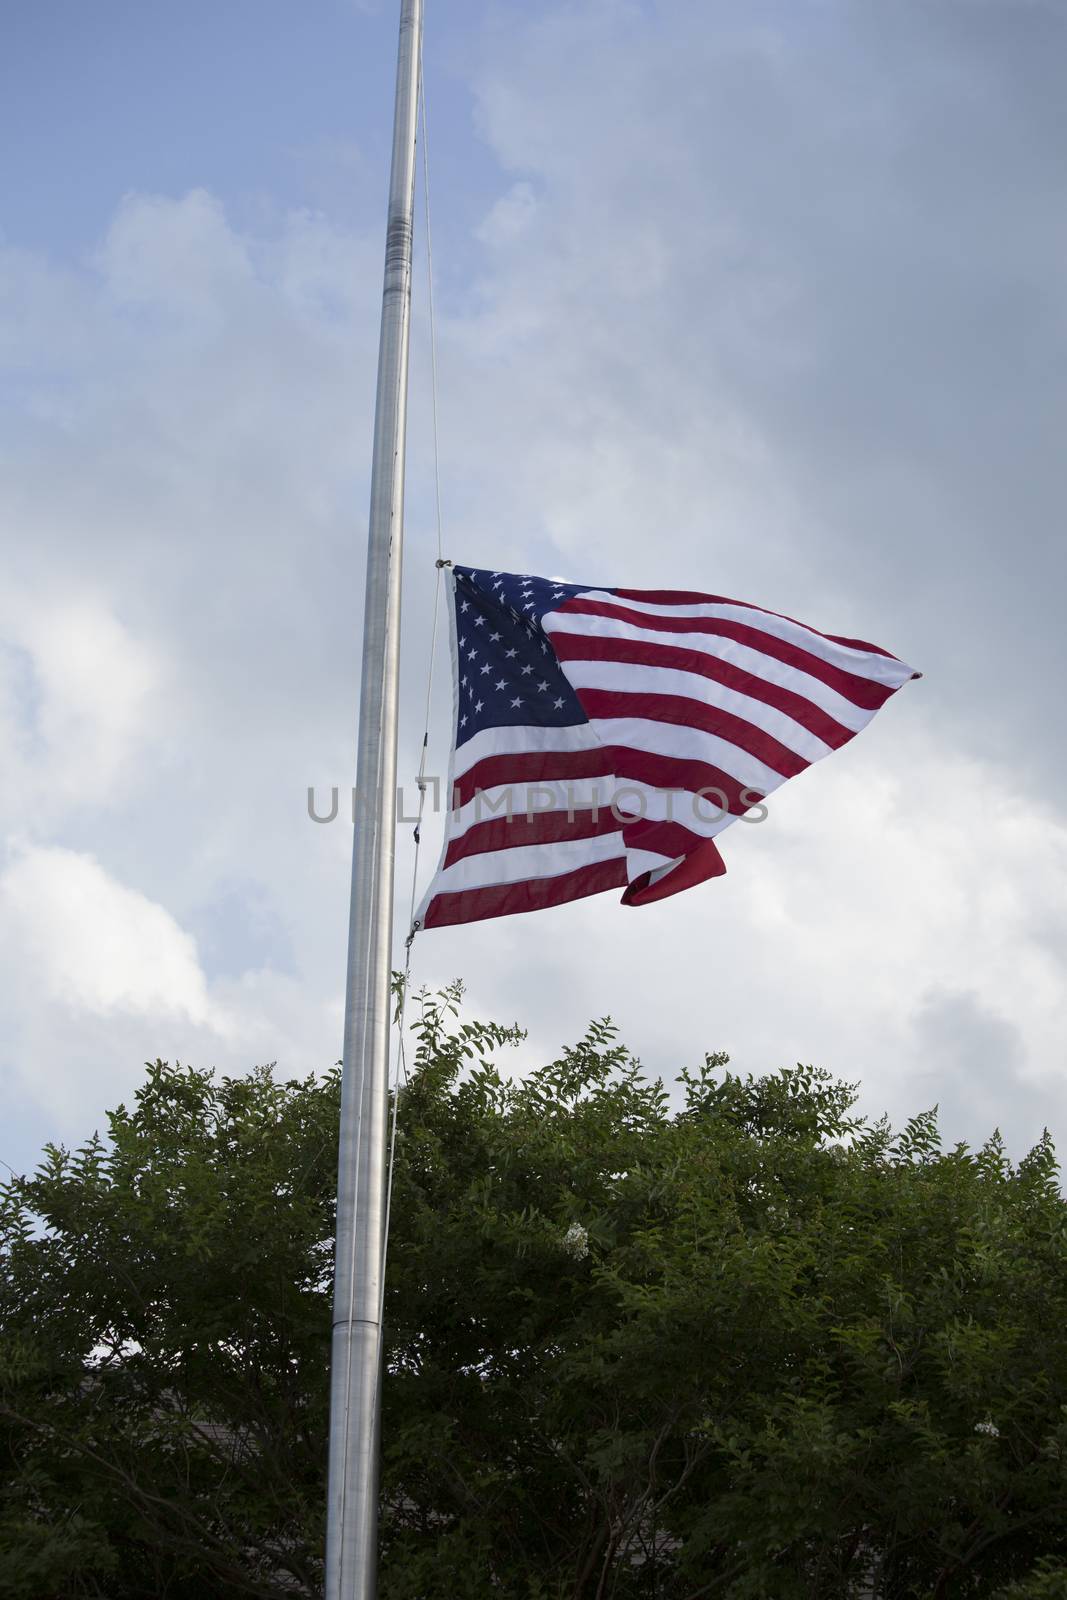 American flag at half mast for mourning and holidays